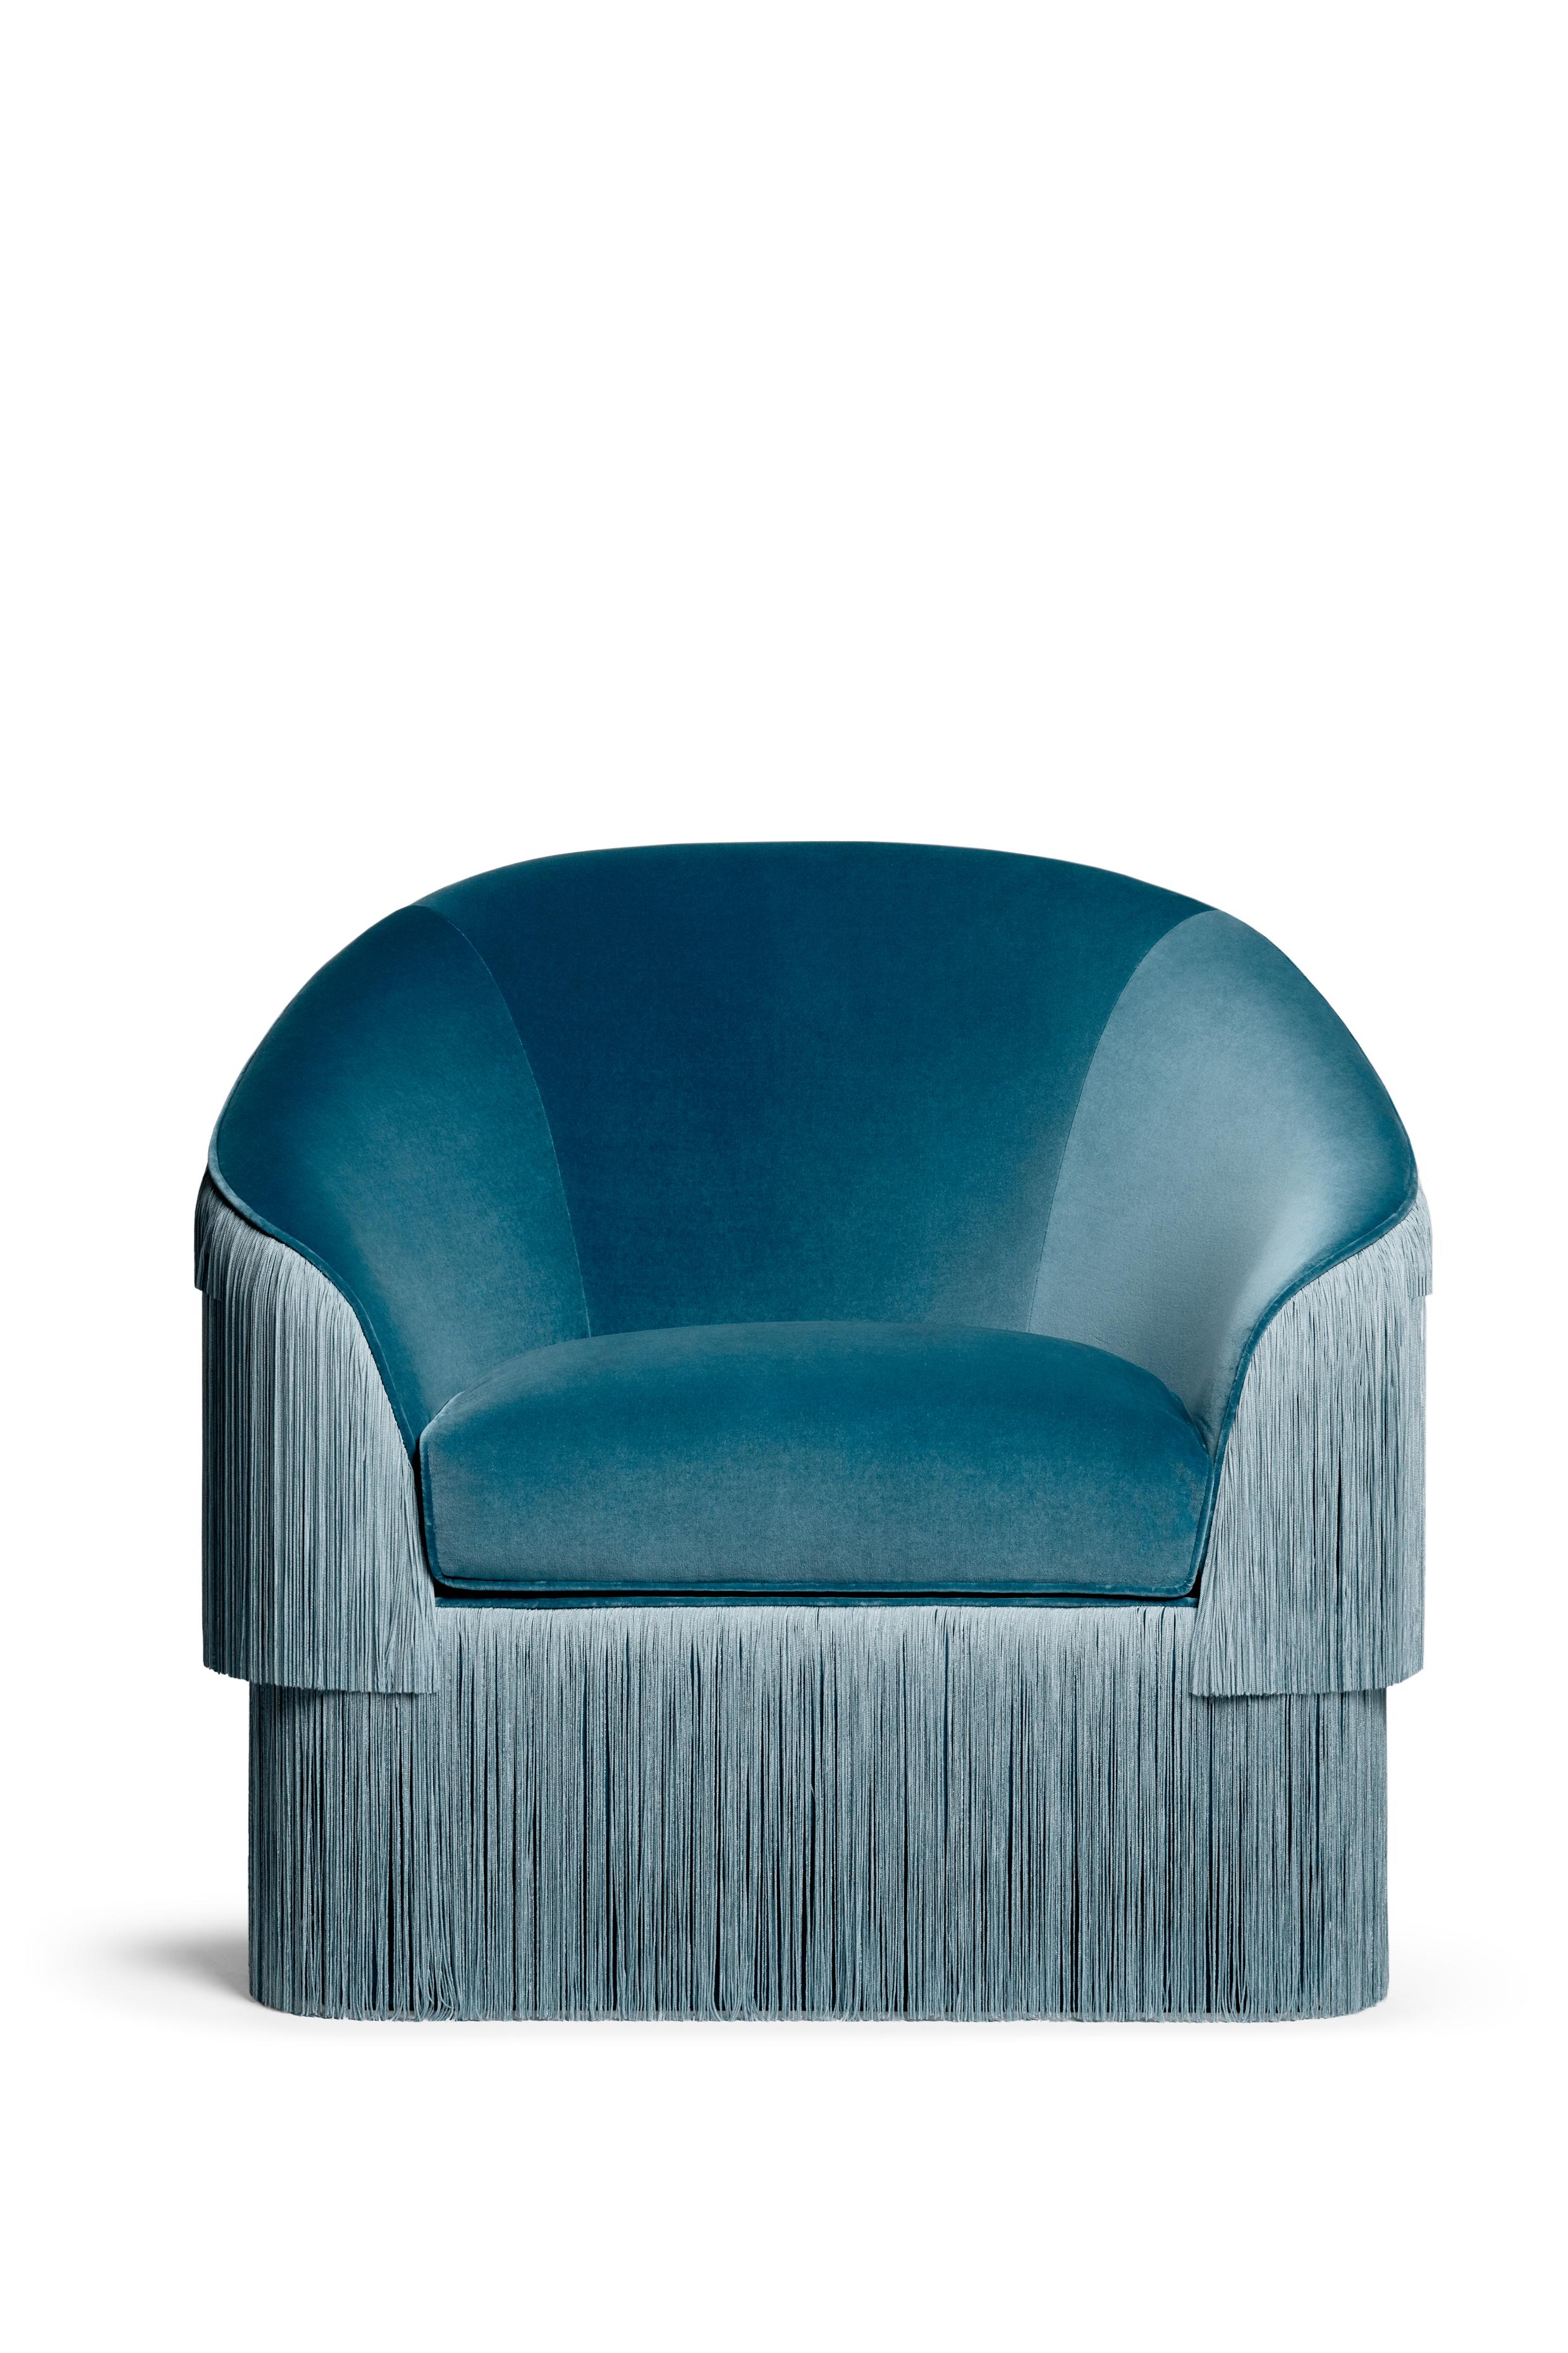 Portuguese Fringes Armchair in Steel Blue